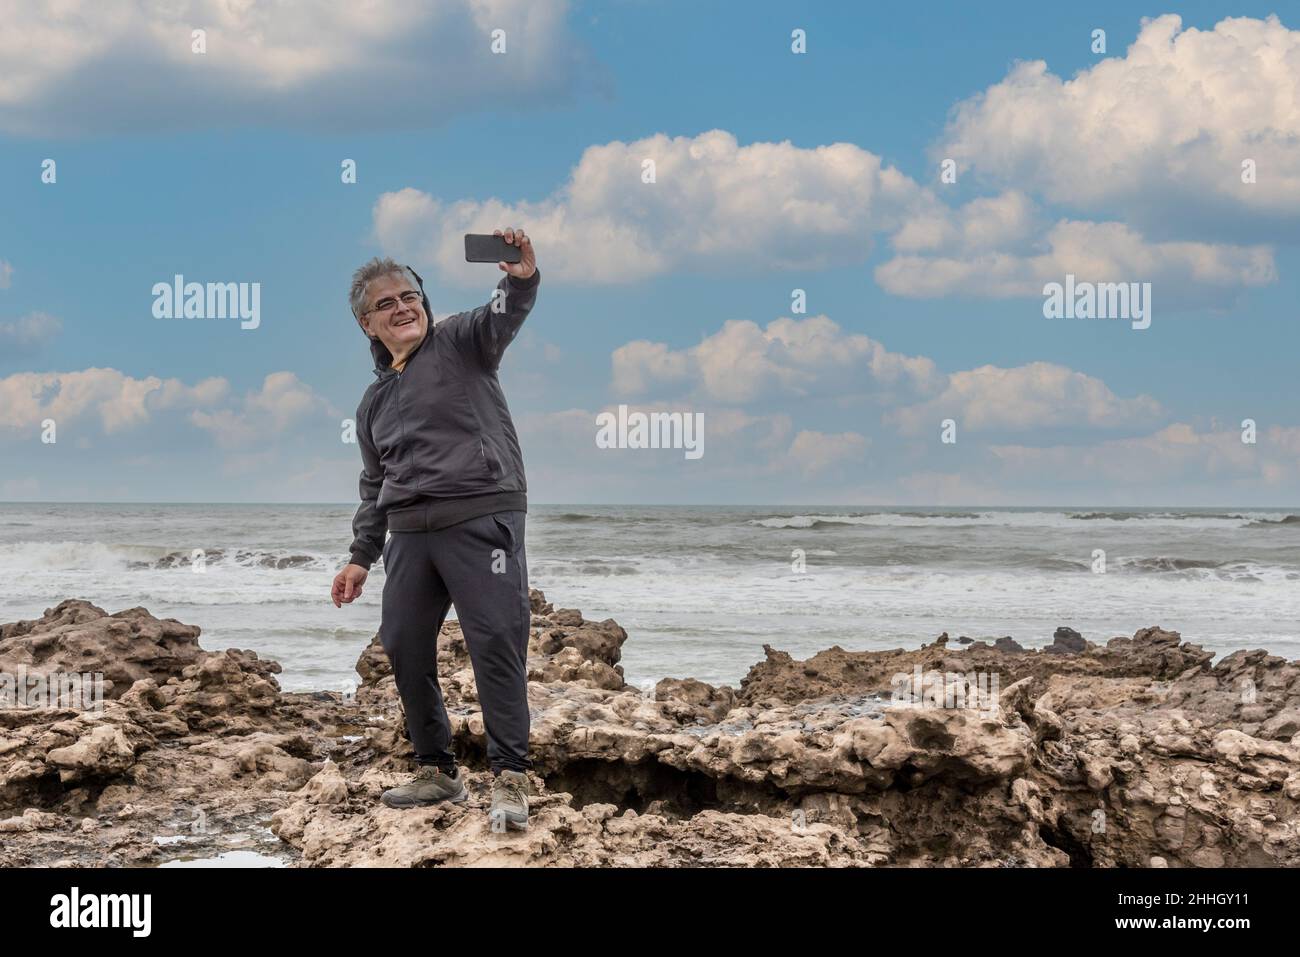 Mature adult tourist with grey hair and glasses taking a selfie on the rocks with the sea behind and a sky with clouds. Stock Photo